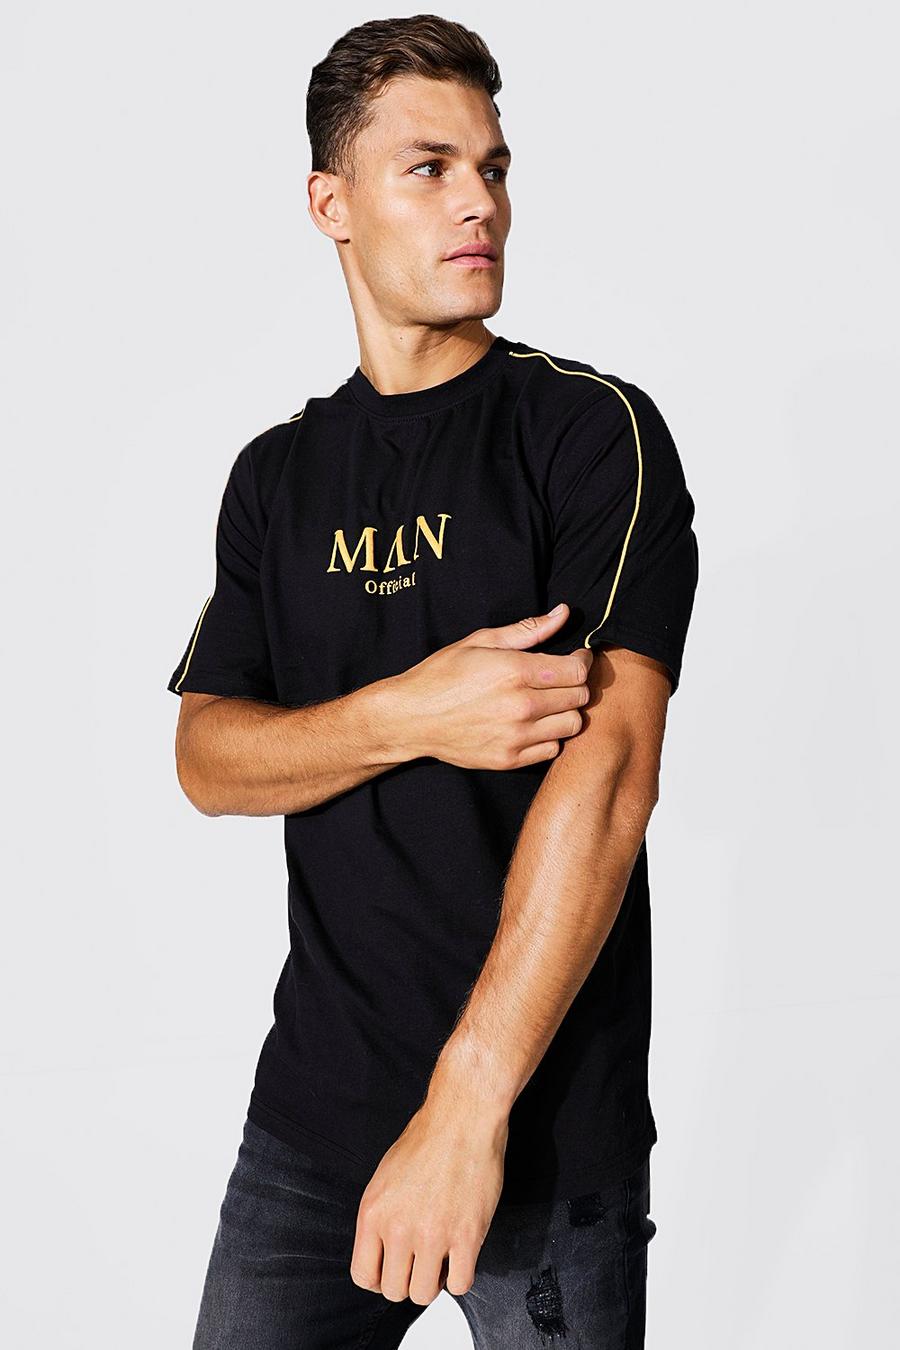 T-shirt Tall Man Gold con cordoncino, Black nero image number 1